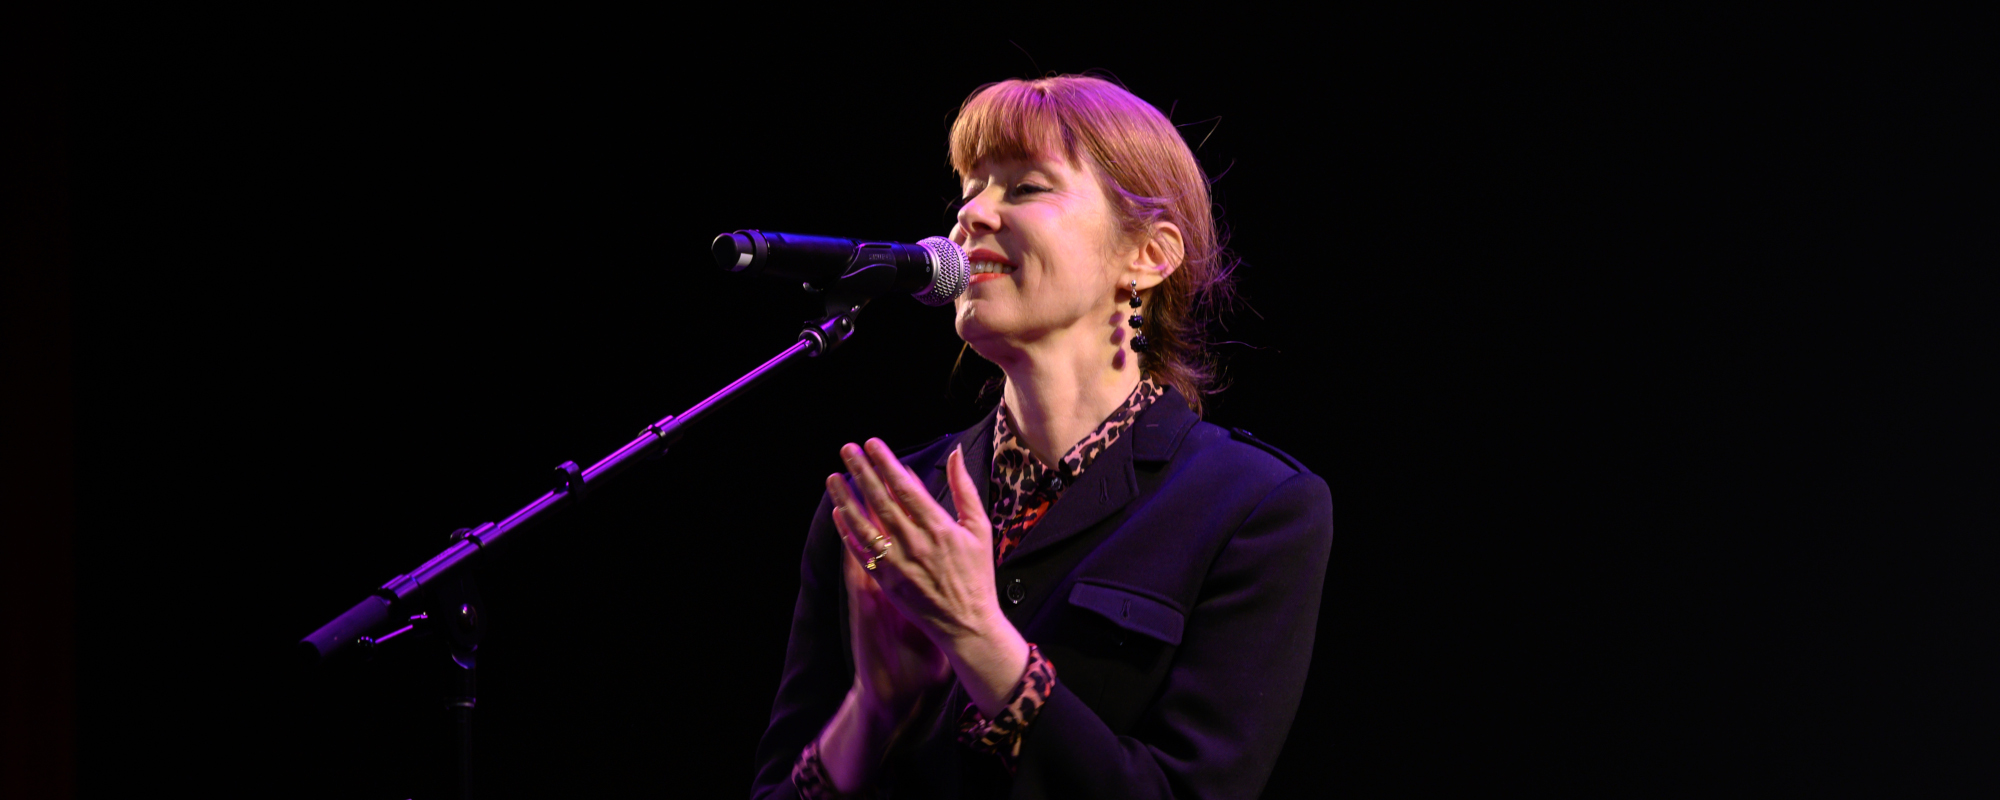 Where Are They Now? Singer/Songwriter Suzanne Vega